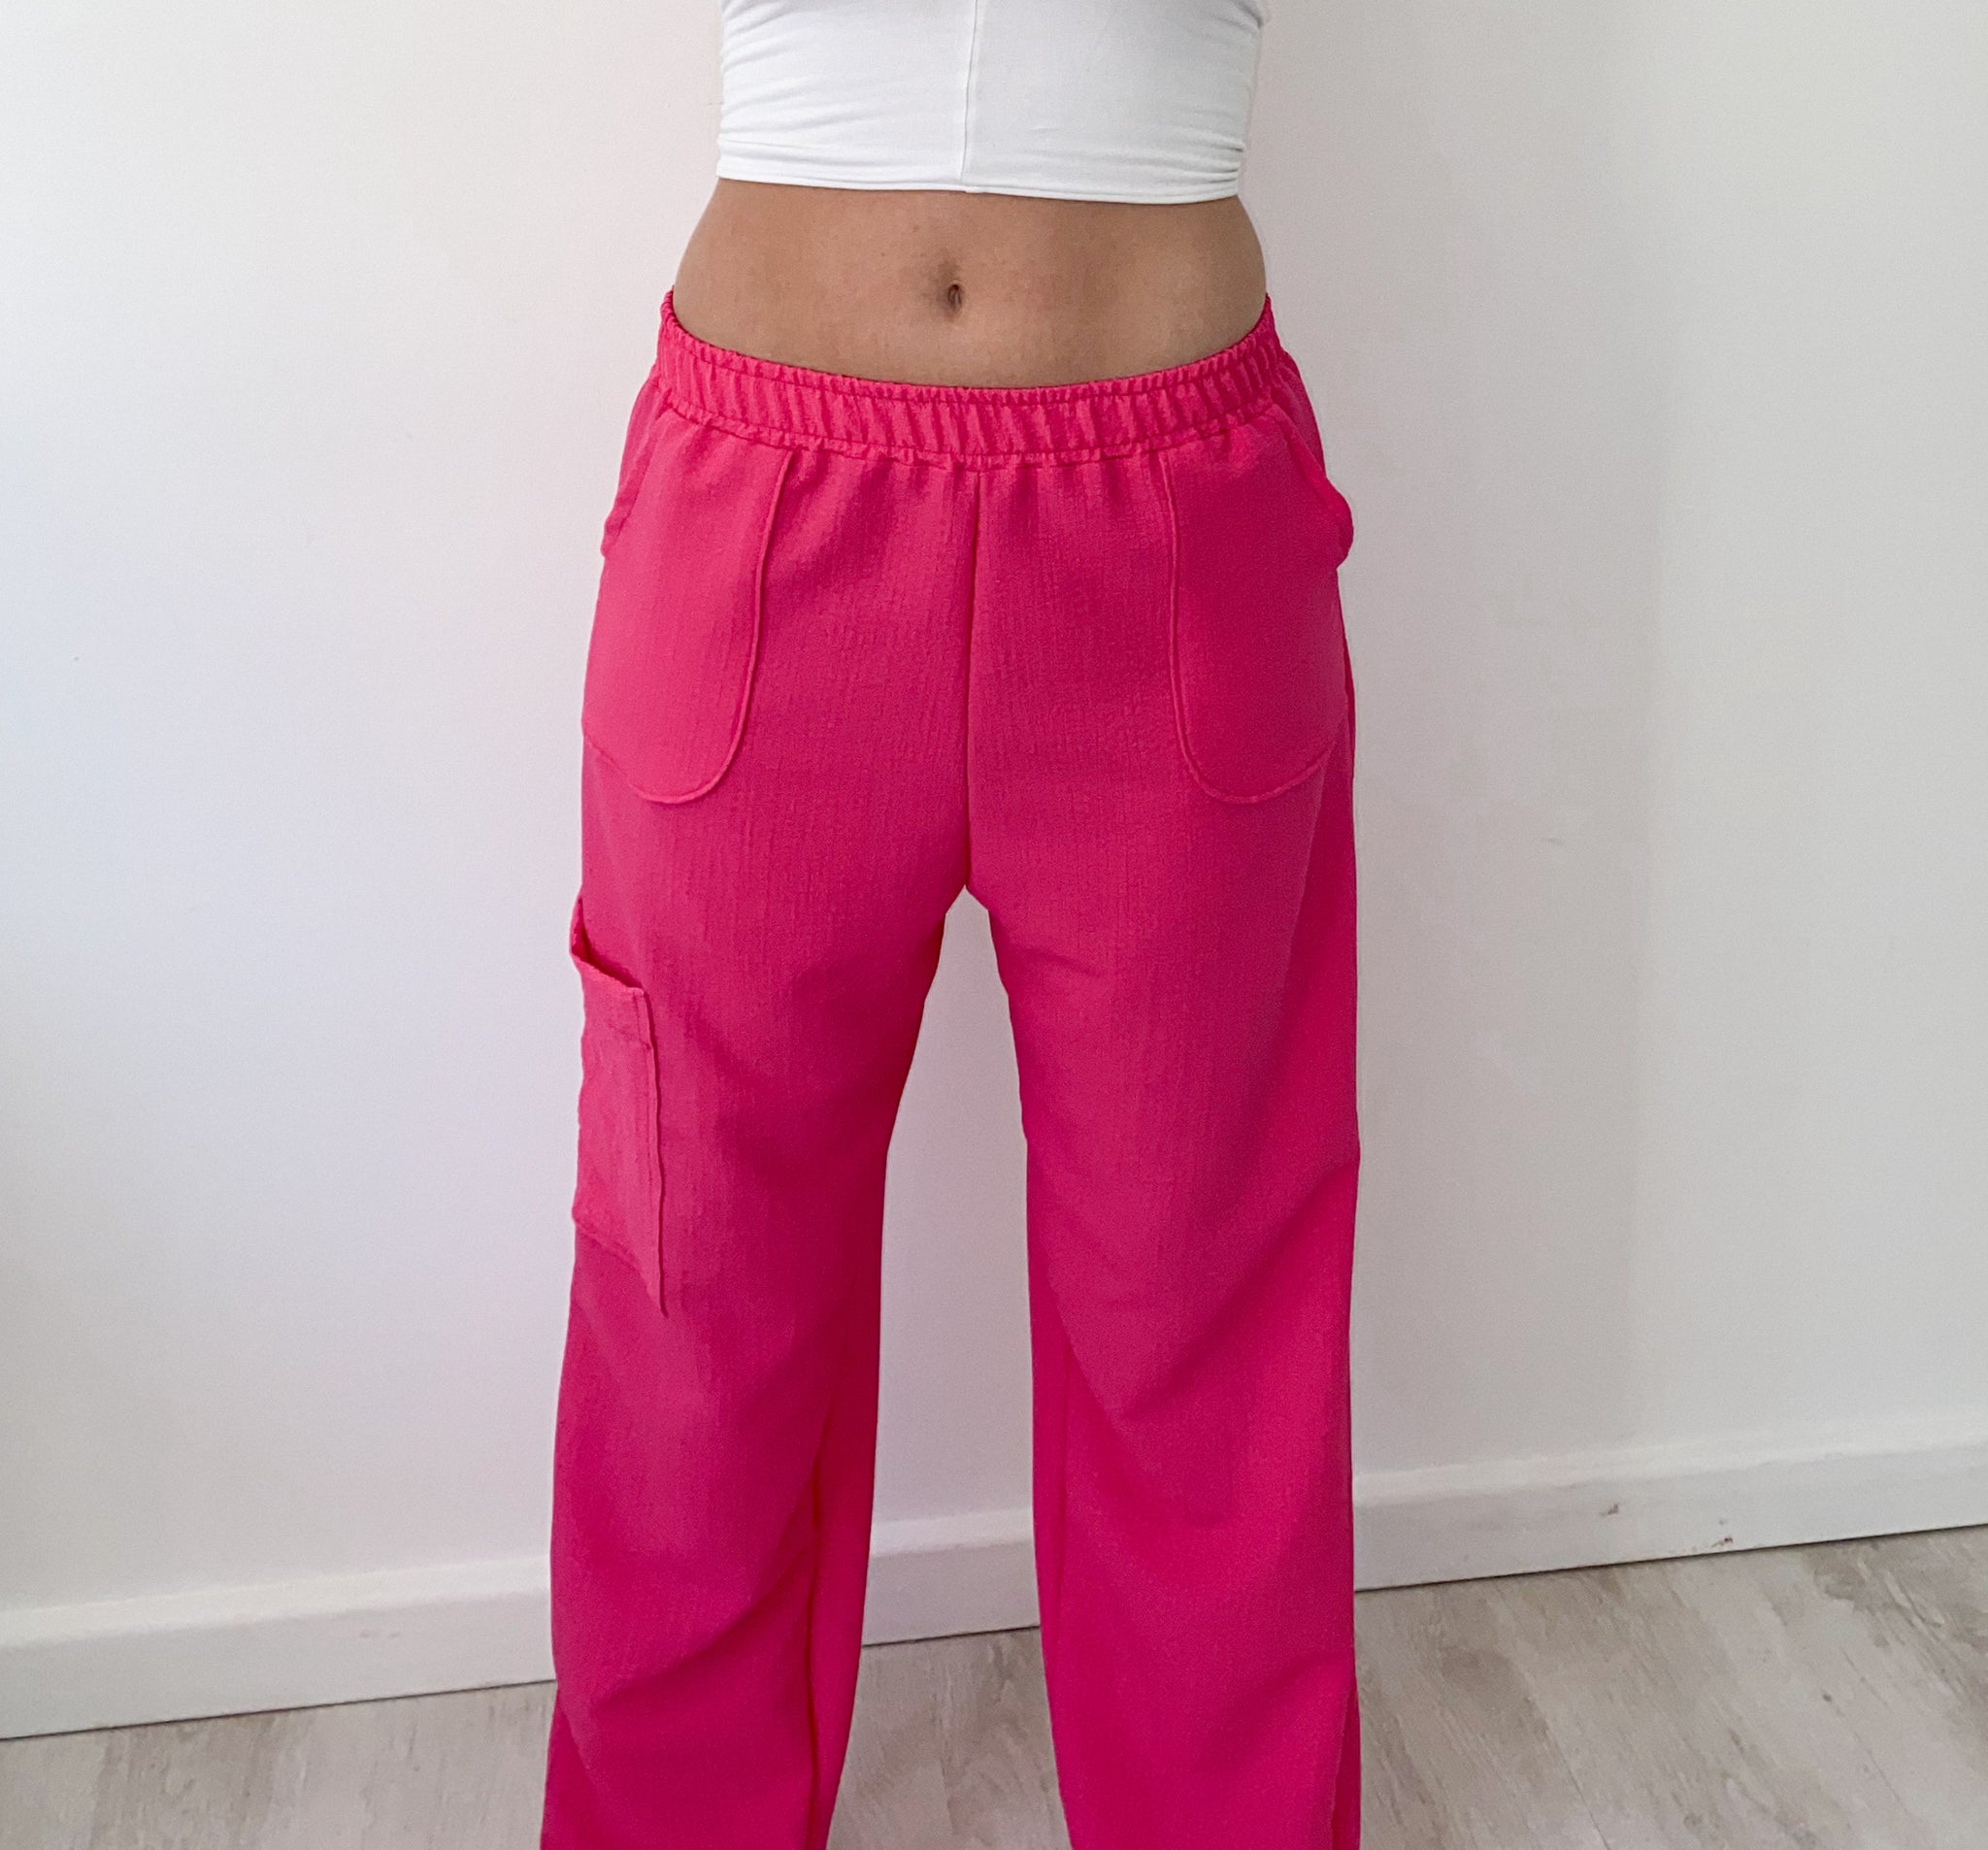 Cargo pants in Hot Pink – Lime Designs